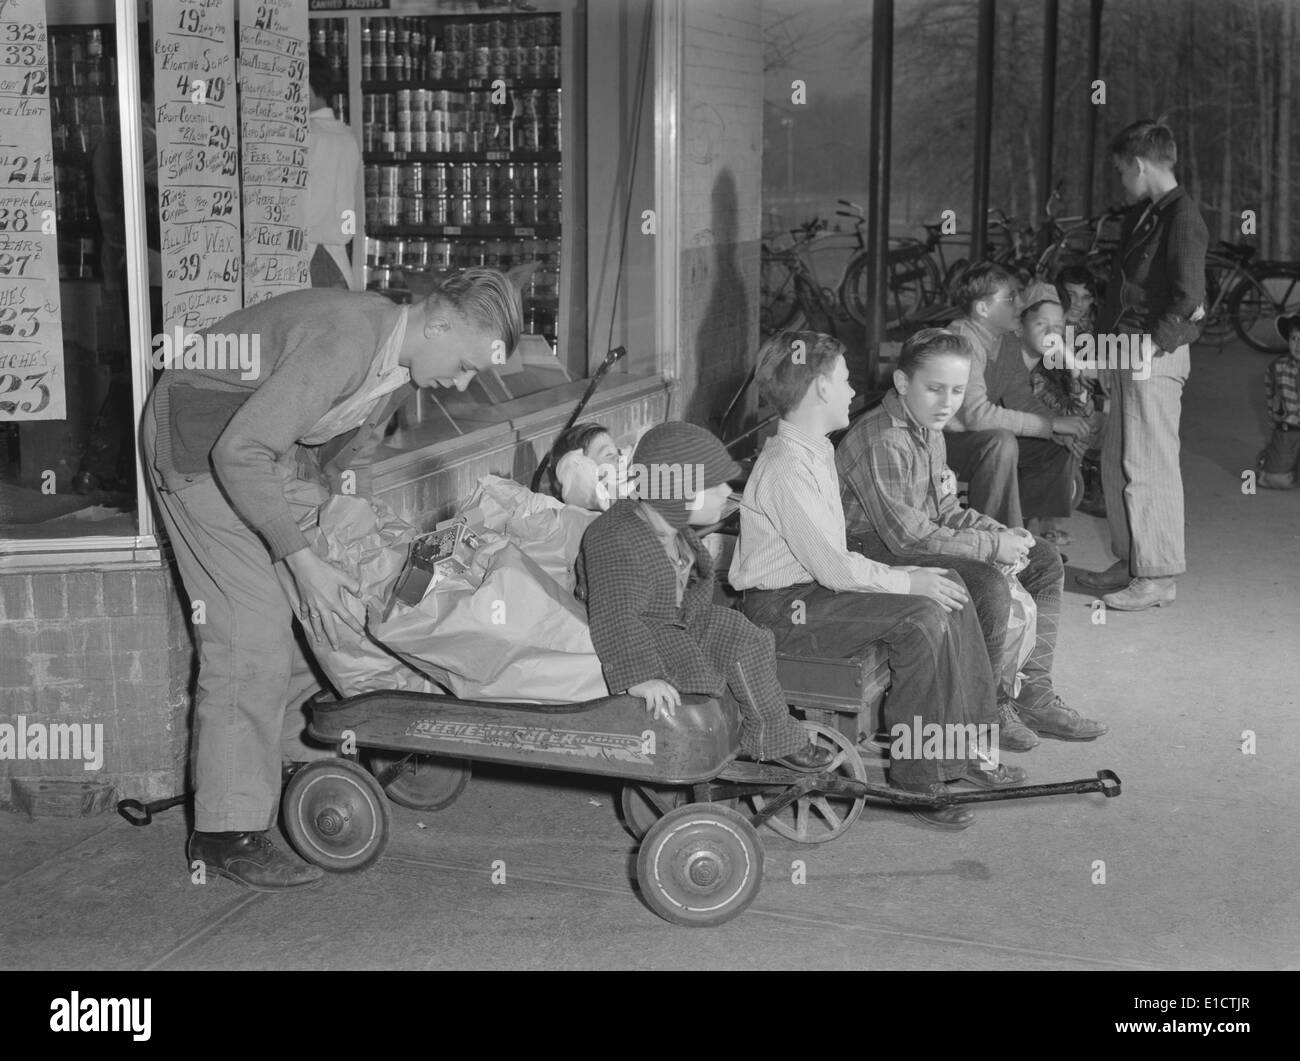 Youngsters hiring out their express wagons to haul groceries in suburban Greenbelt, Maryland. World War 2 tire and gasoline Stock Photo